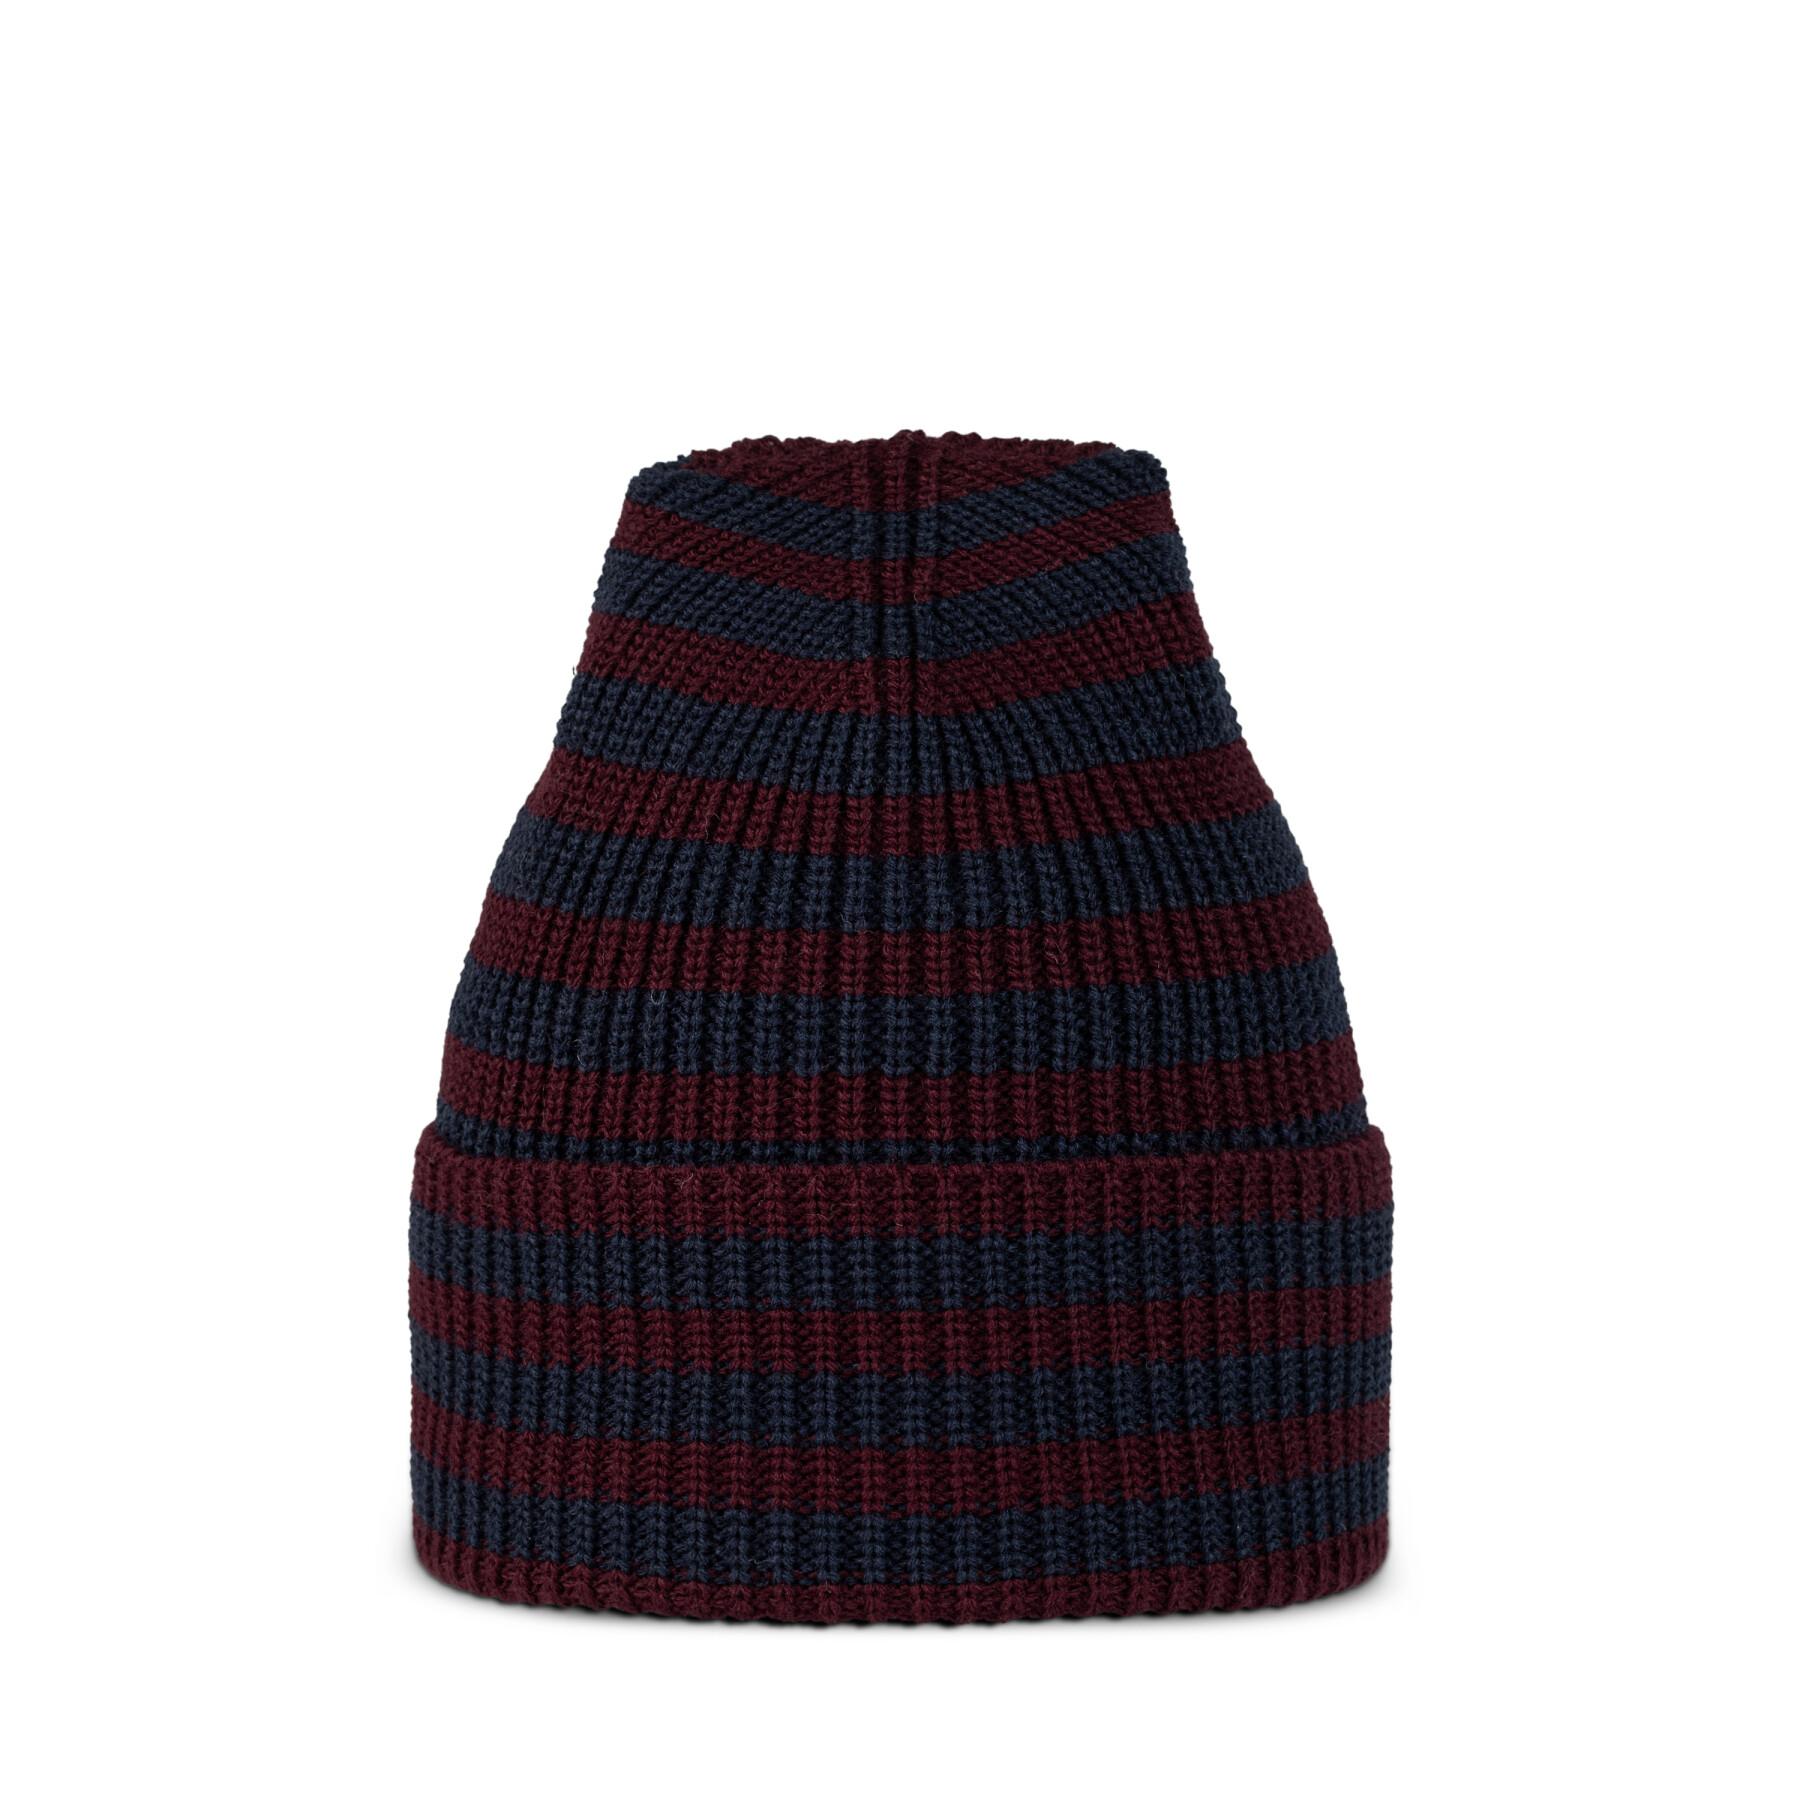 Children's knitted hat Buff Zimic Stripers